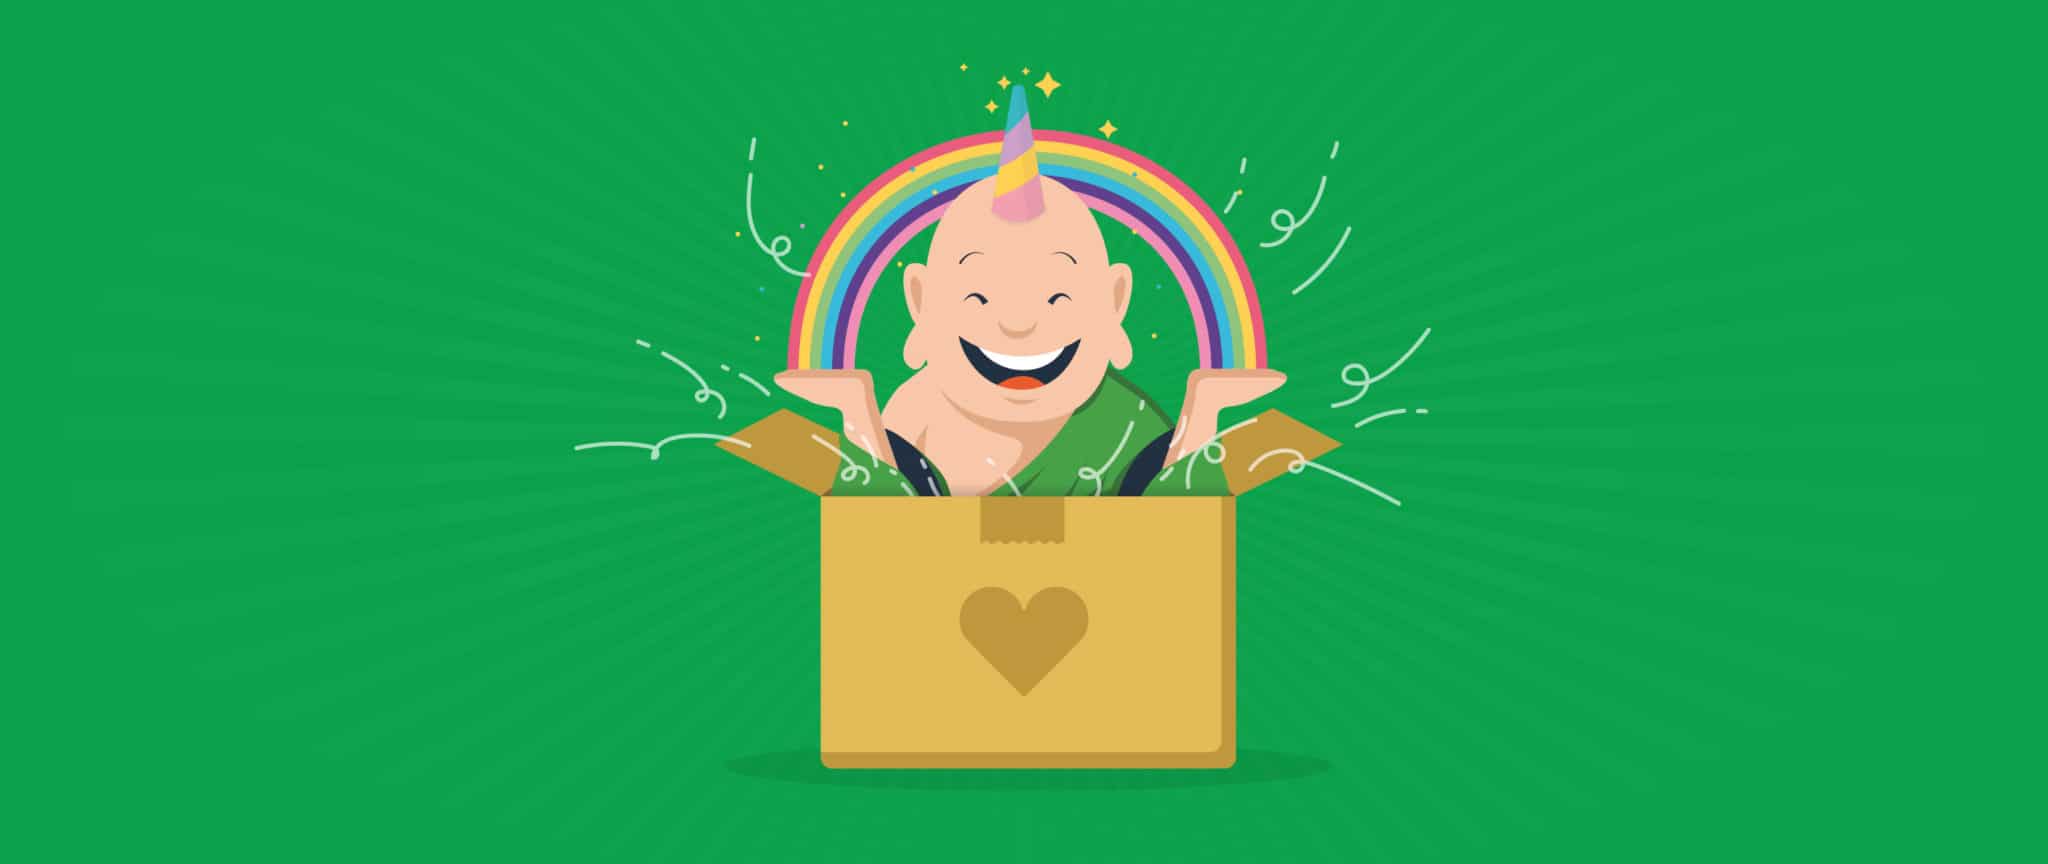 Budd the Monk, adorned with a unicorn horn and rainbow, emerges out of a cardboard box.